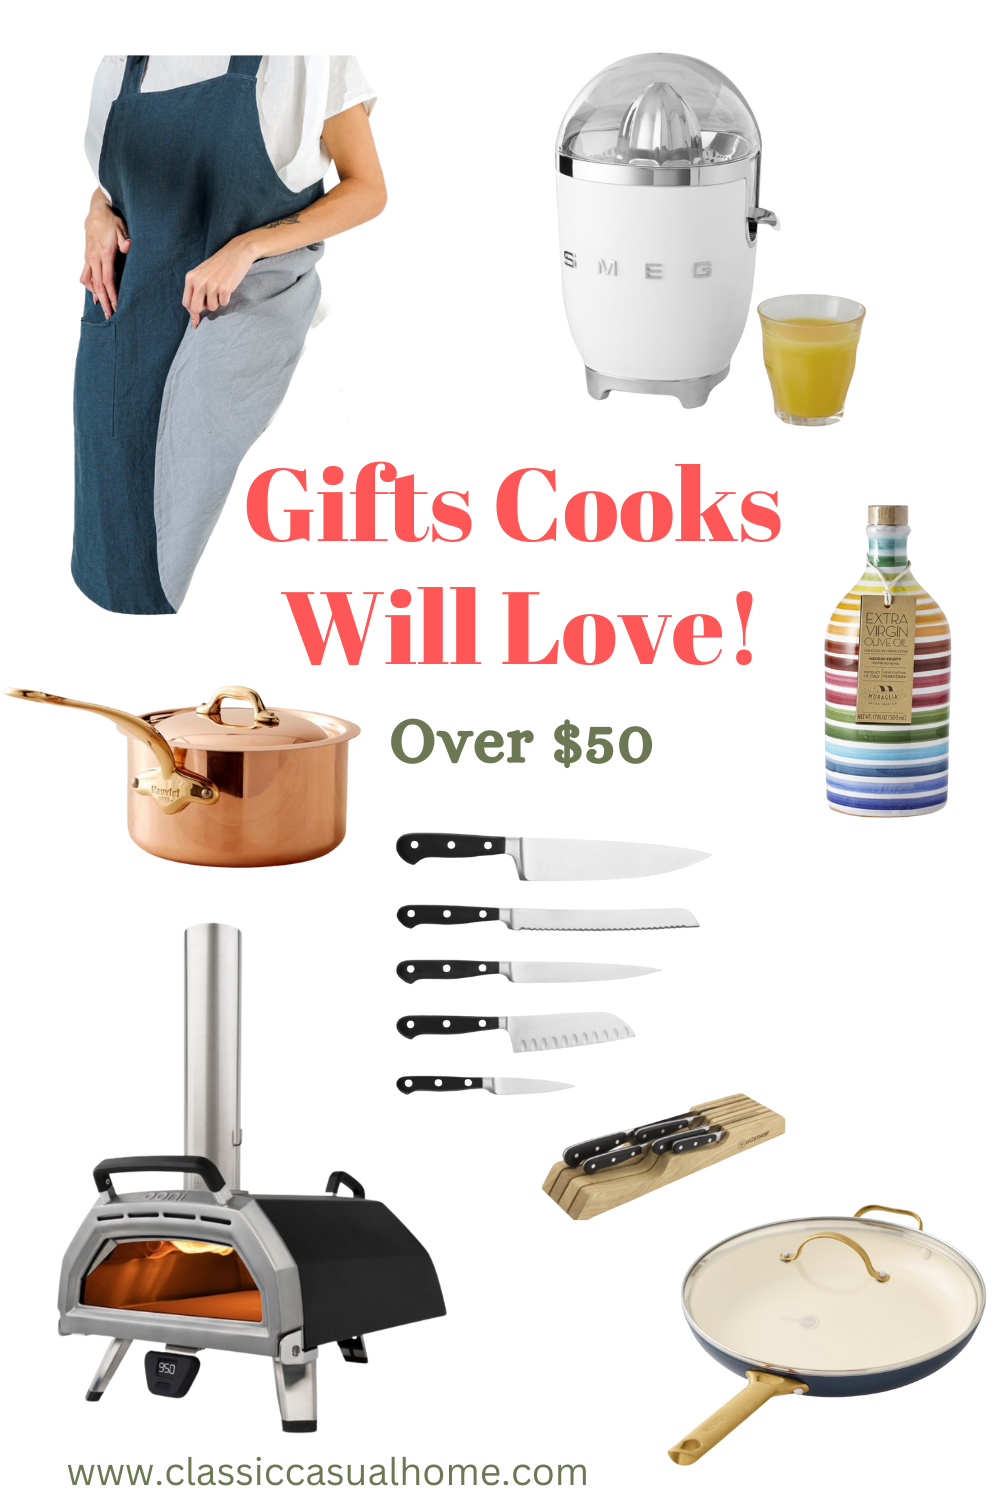 Best Gifts Cooks Will Love from a pizza oven to olive oil